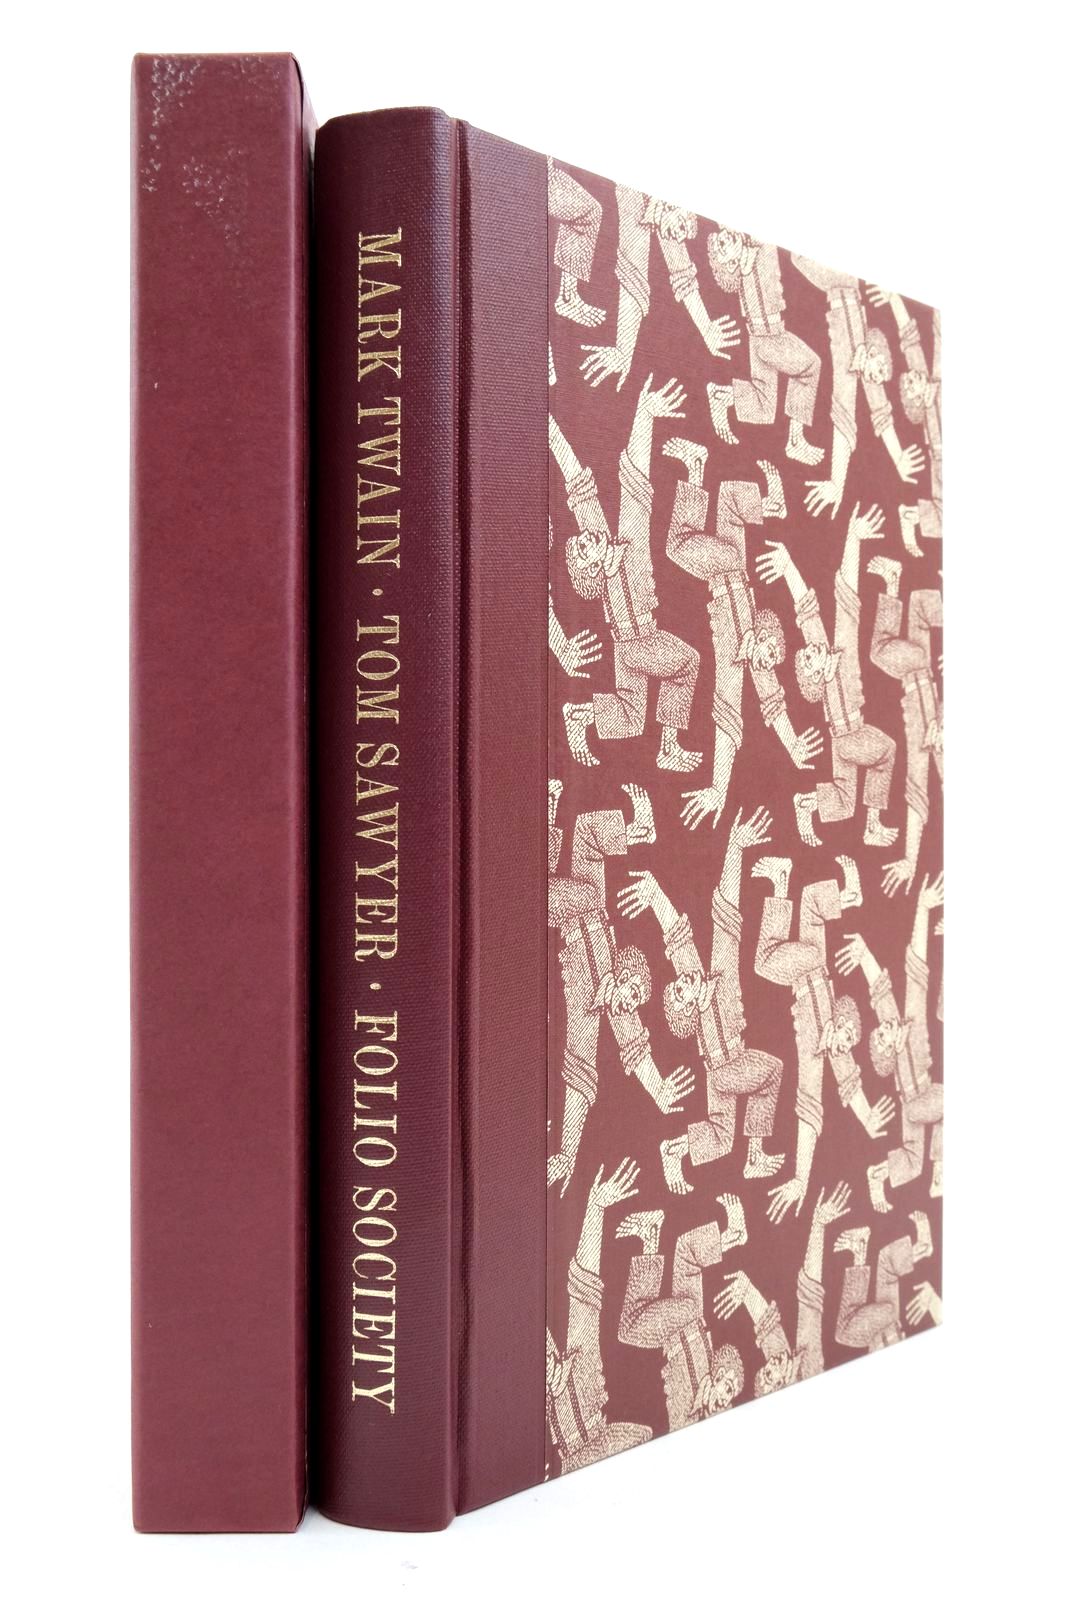 Photo of THE ADVENTURES OF TOM SAWYER written by Twain, Mark
Doctorow, E.L. illustrated by Brockway, Harry published by Folio Society (STOCK CODE: 2138146)  for sale by Stella & Rose's Books